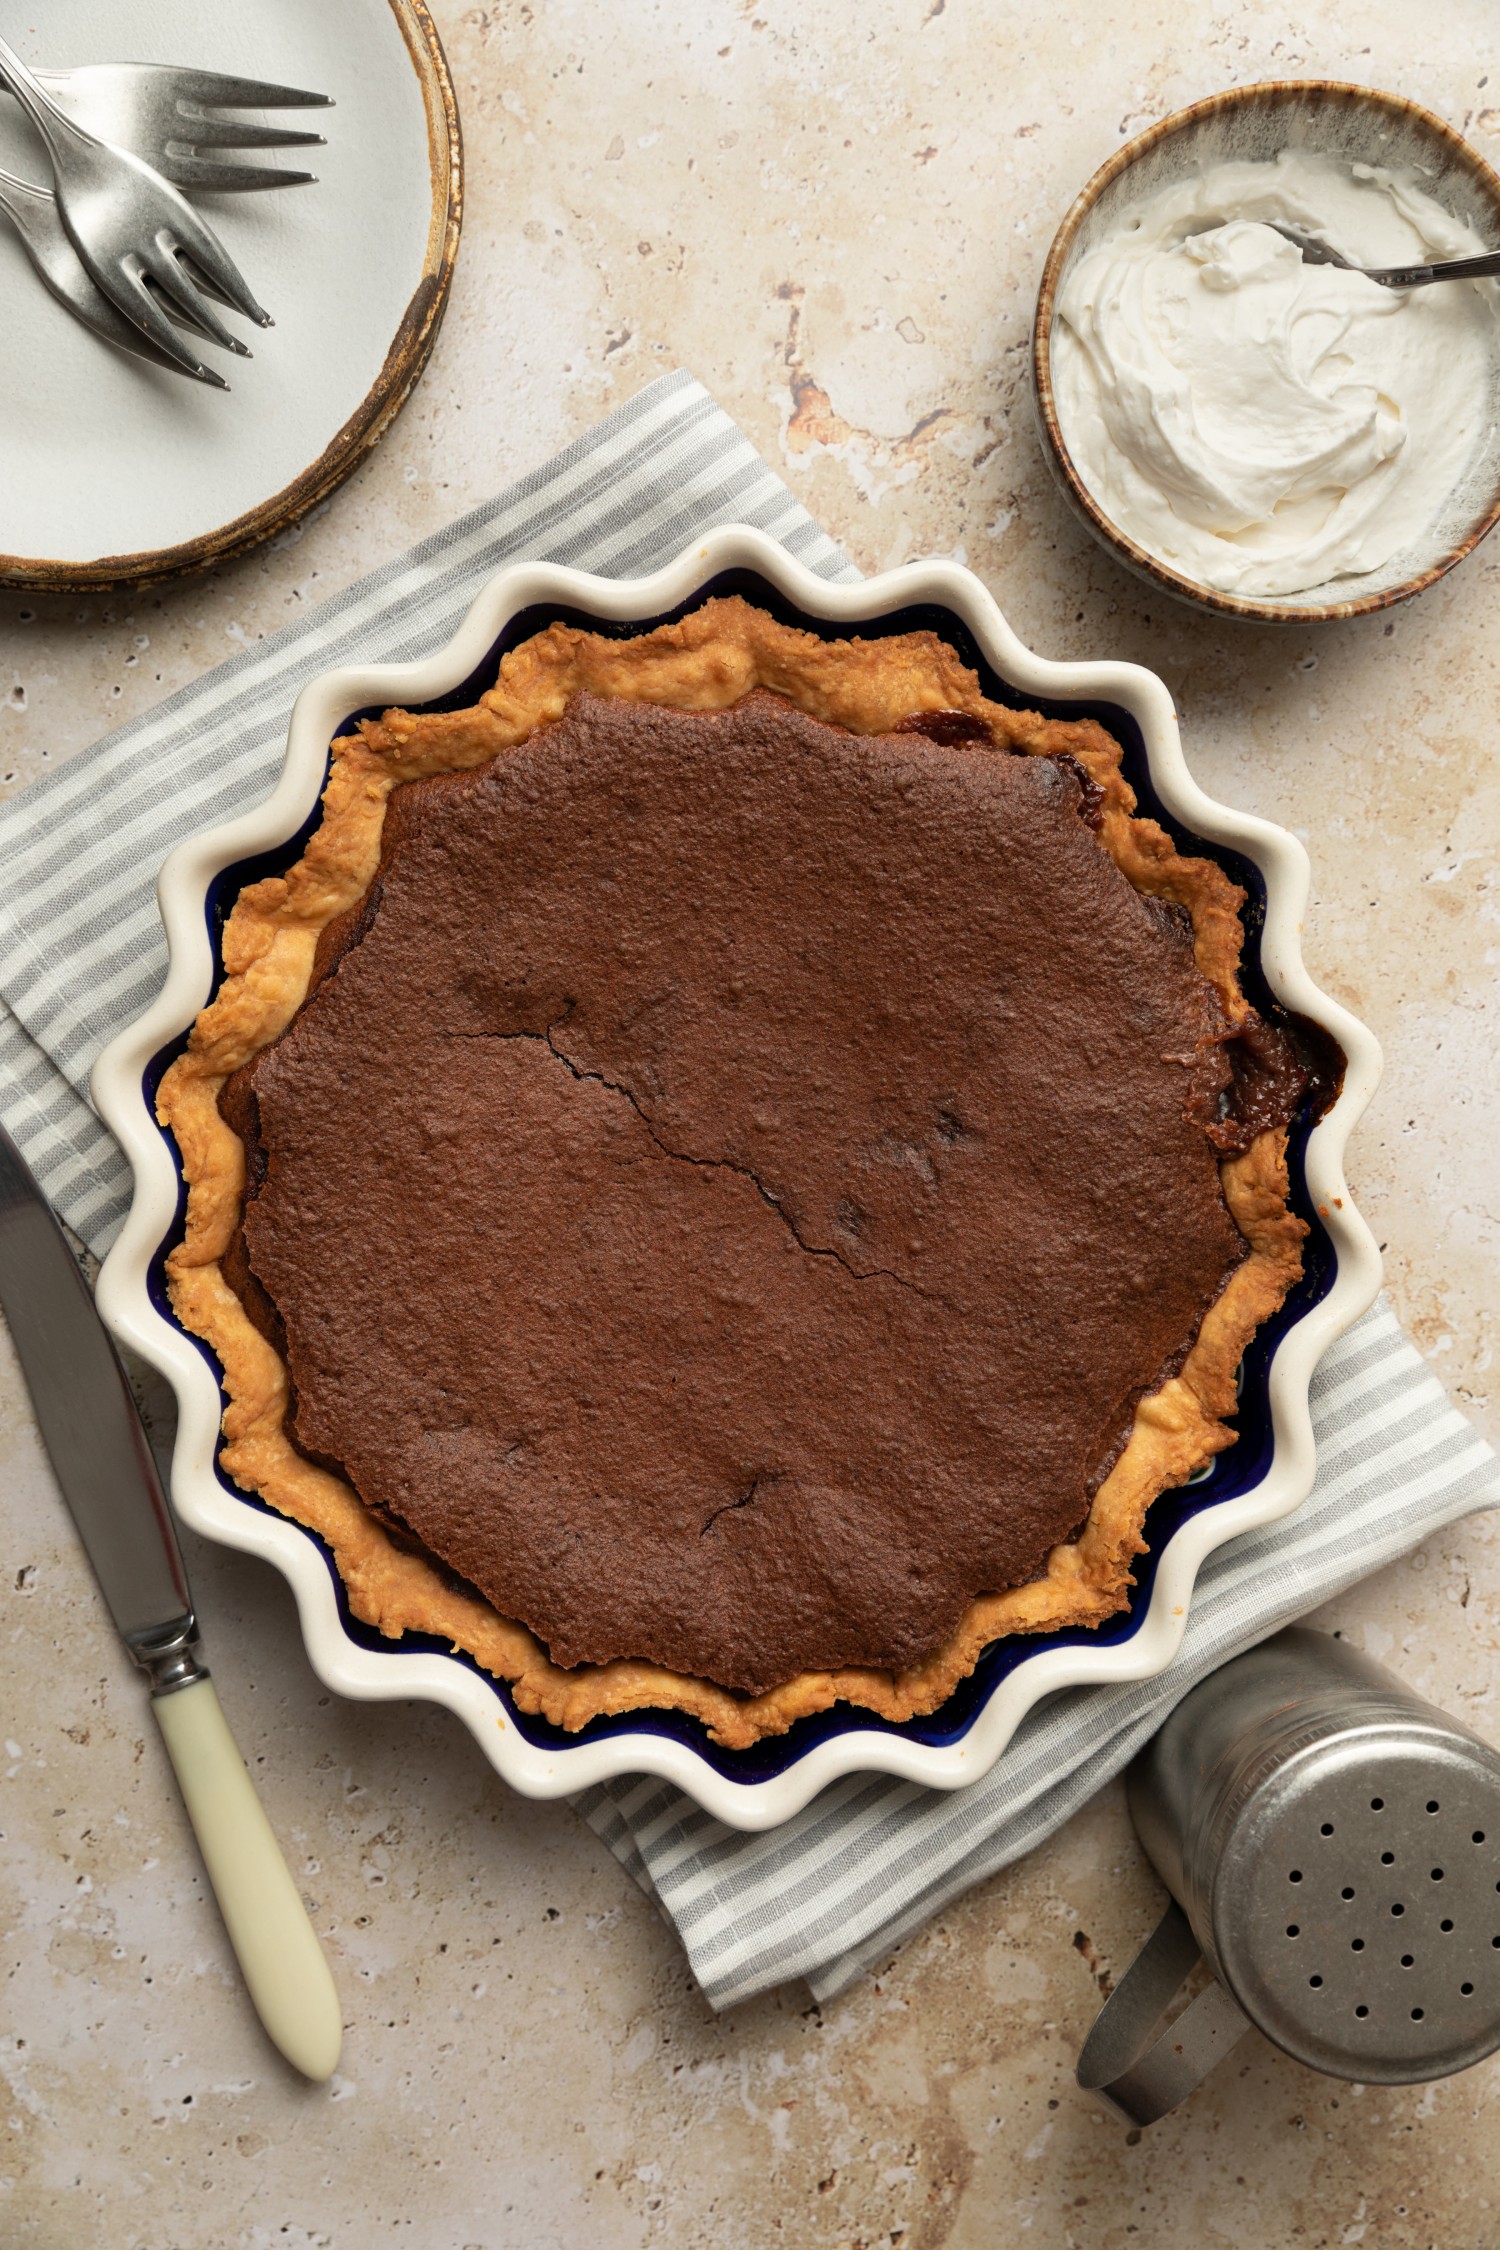 Baked chocolate chess pie in a pie plate